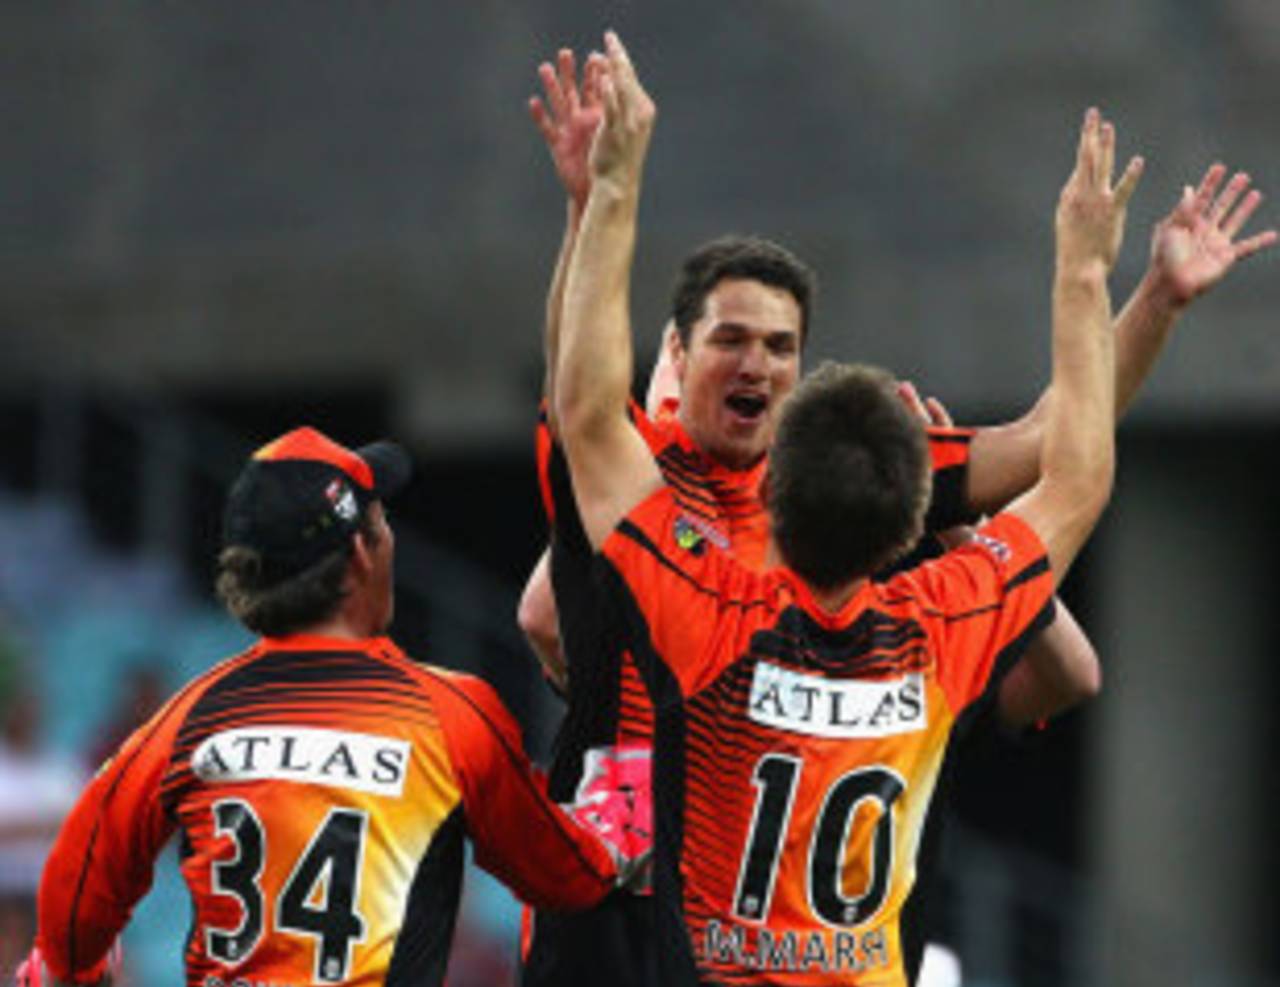 There will be no further WACA sanctions for members of the Perth Scorchers CLT20 team&nbsp;&nbsp;&bull;&nbsp;&nbsp;Getty Images